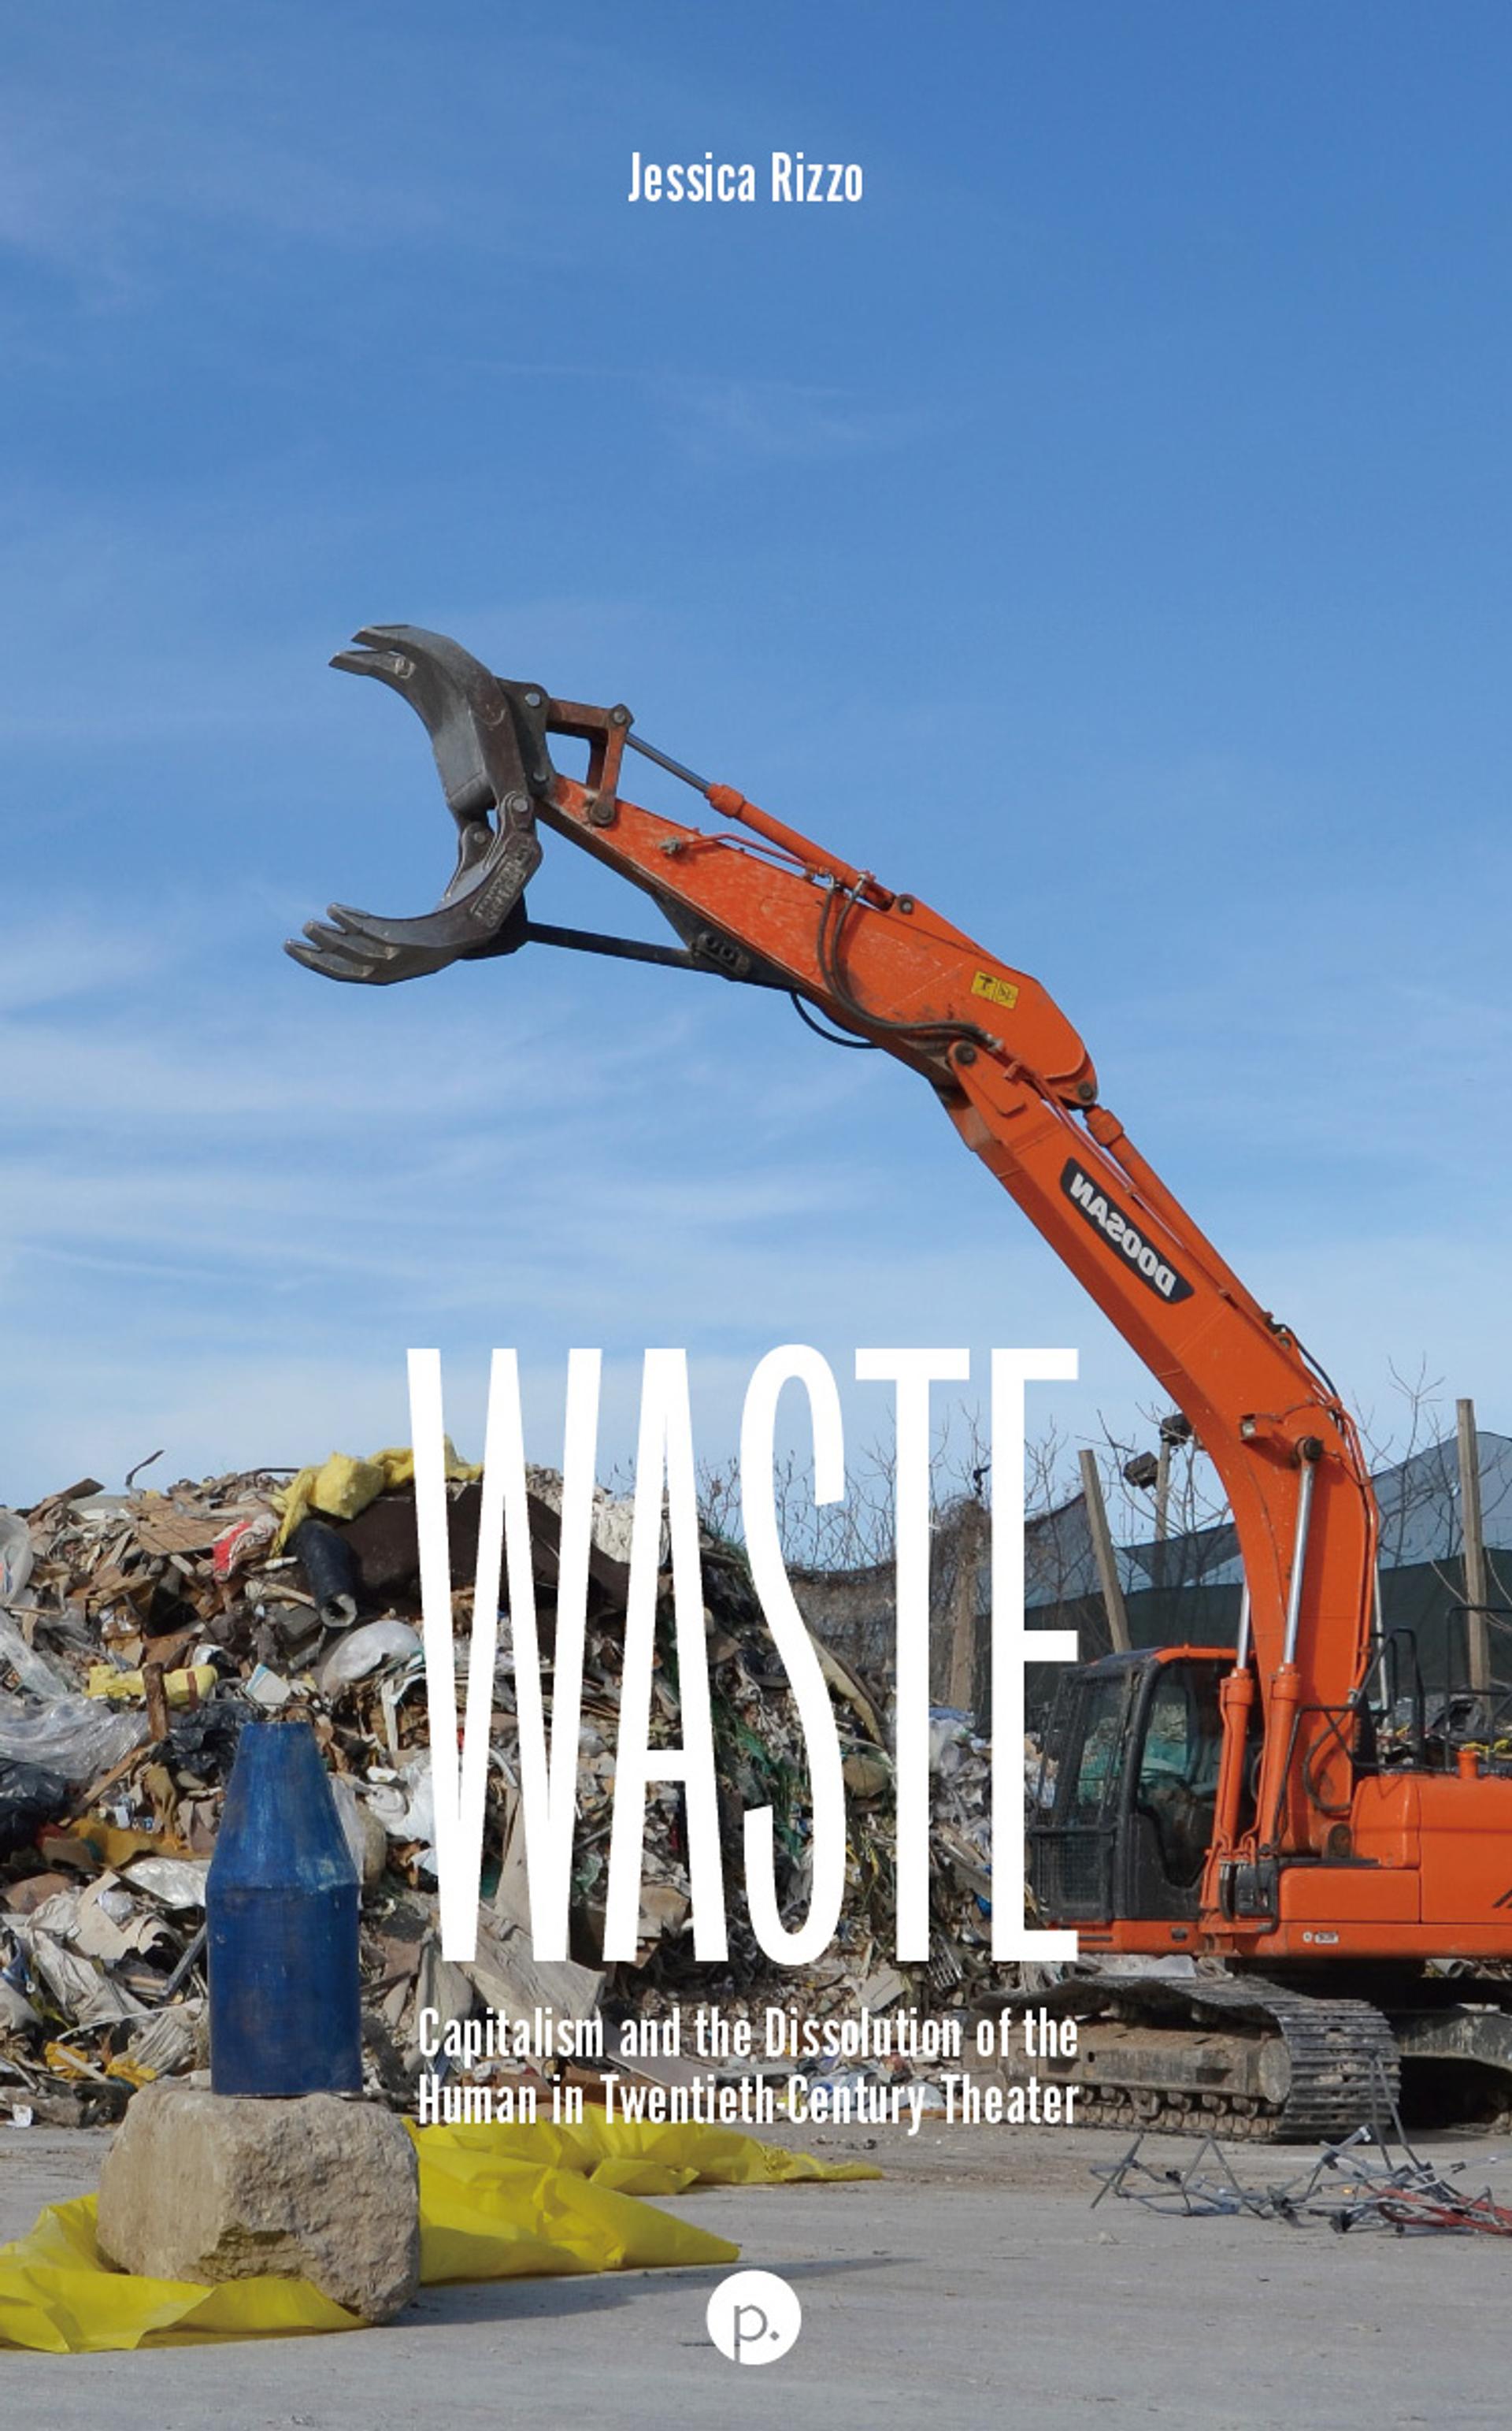 Cover of book titled WASTE: Capitalism and the Dissolution of the Human in Twentieth-Century Theater